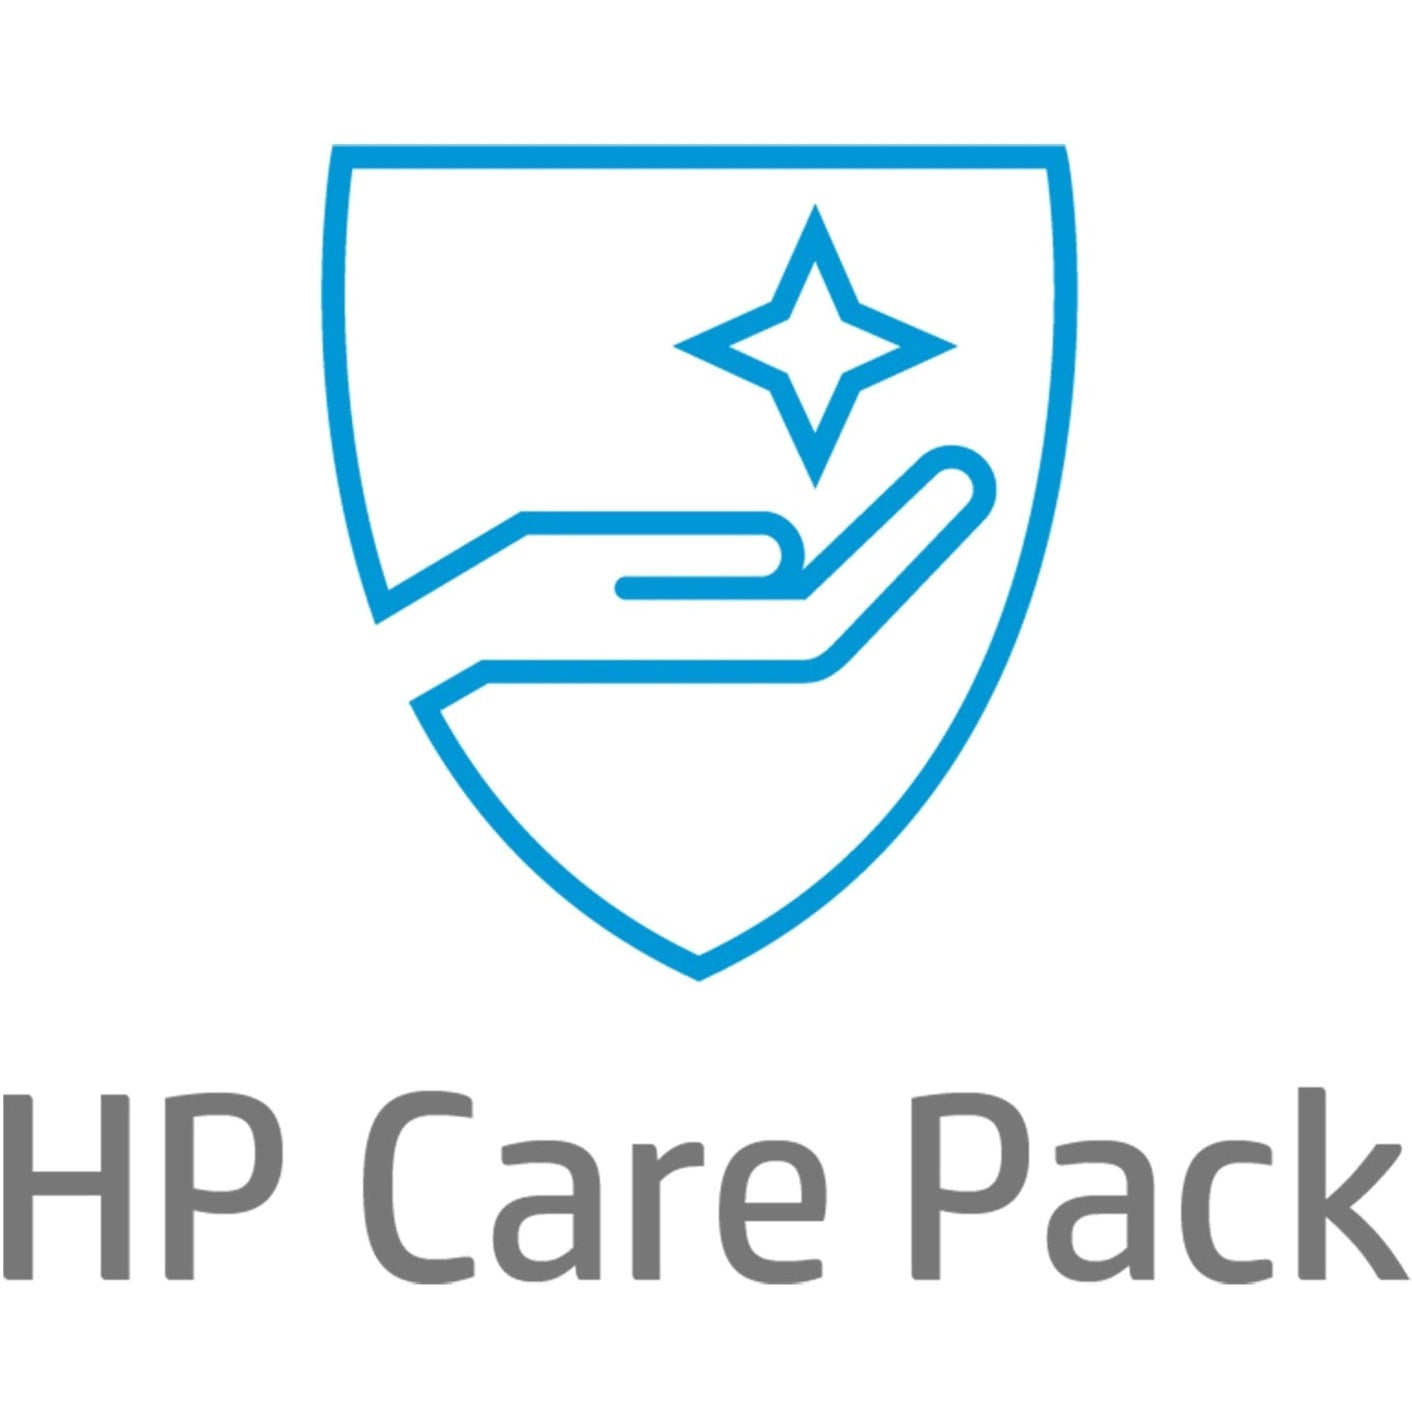 HP Care Pack - Extended Service - 4 Year - Service (U9DQ6E)